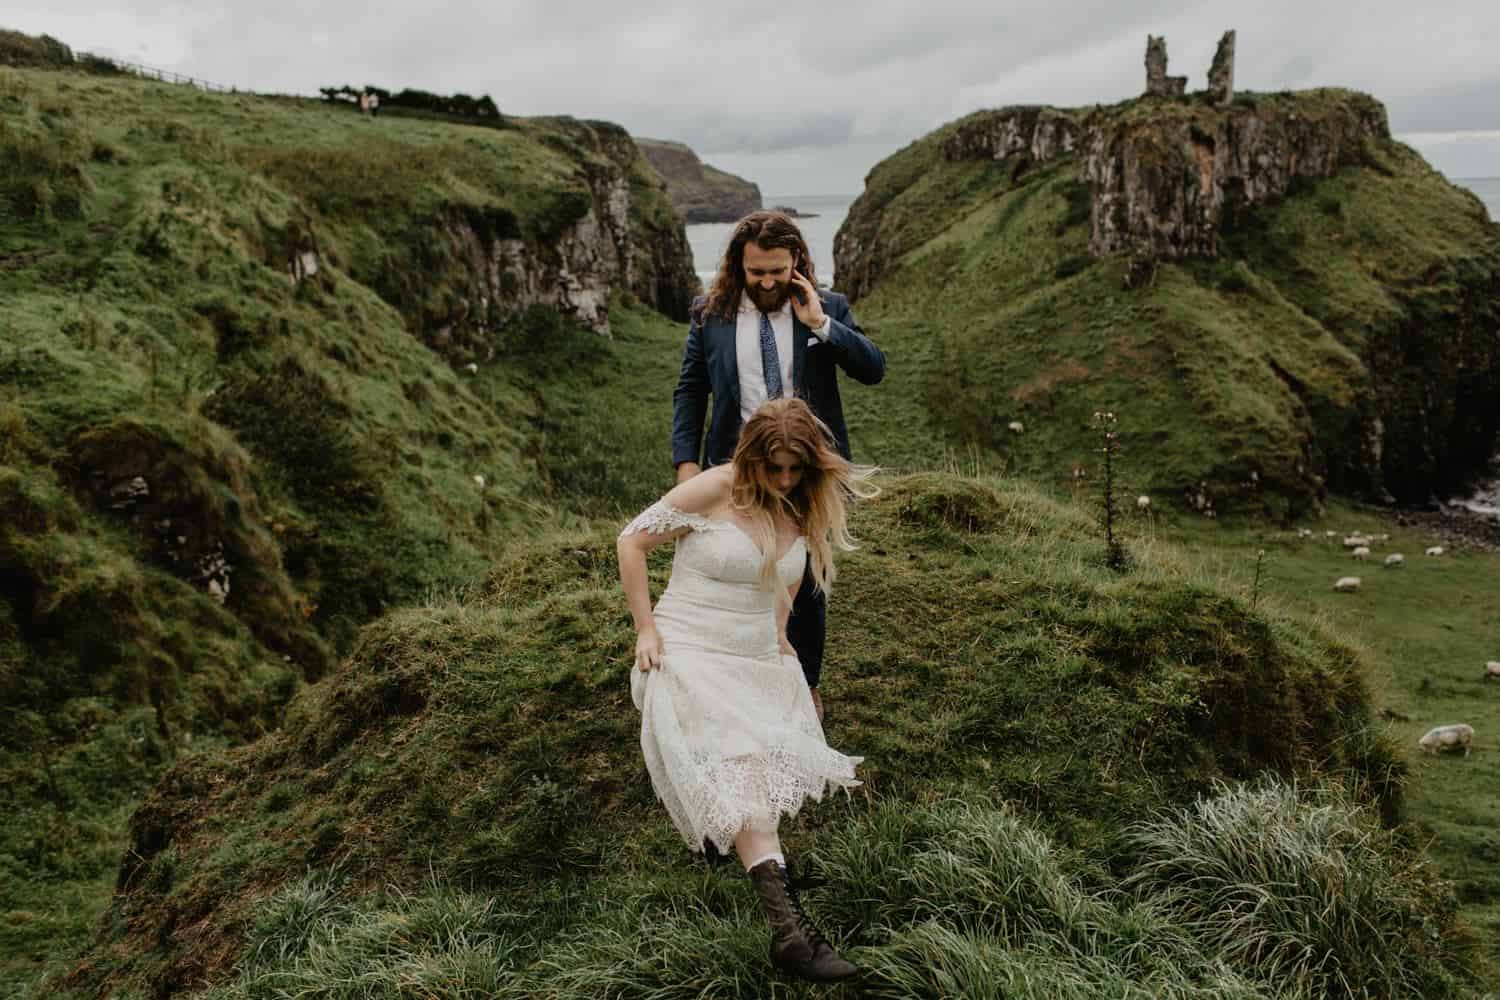 Couple eloping and walking over Irish fields with castle in the backdrop